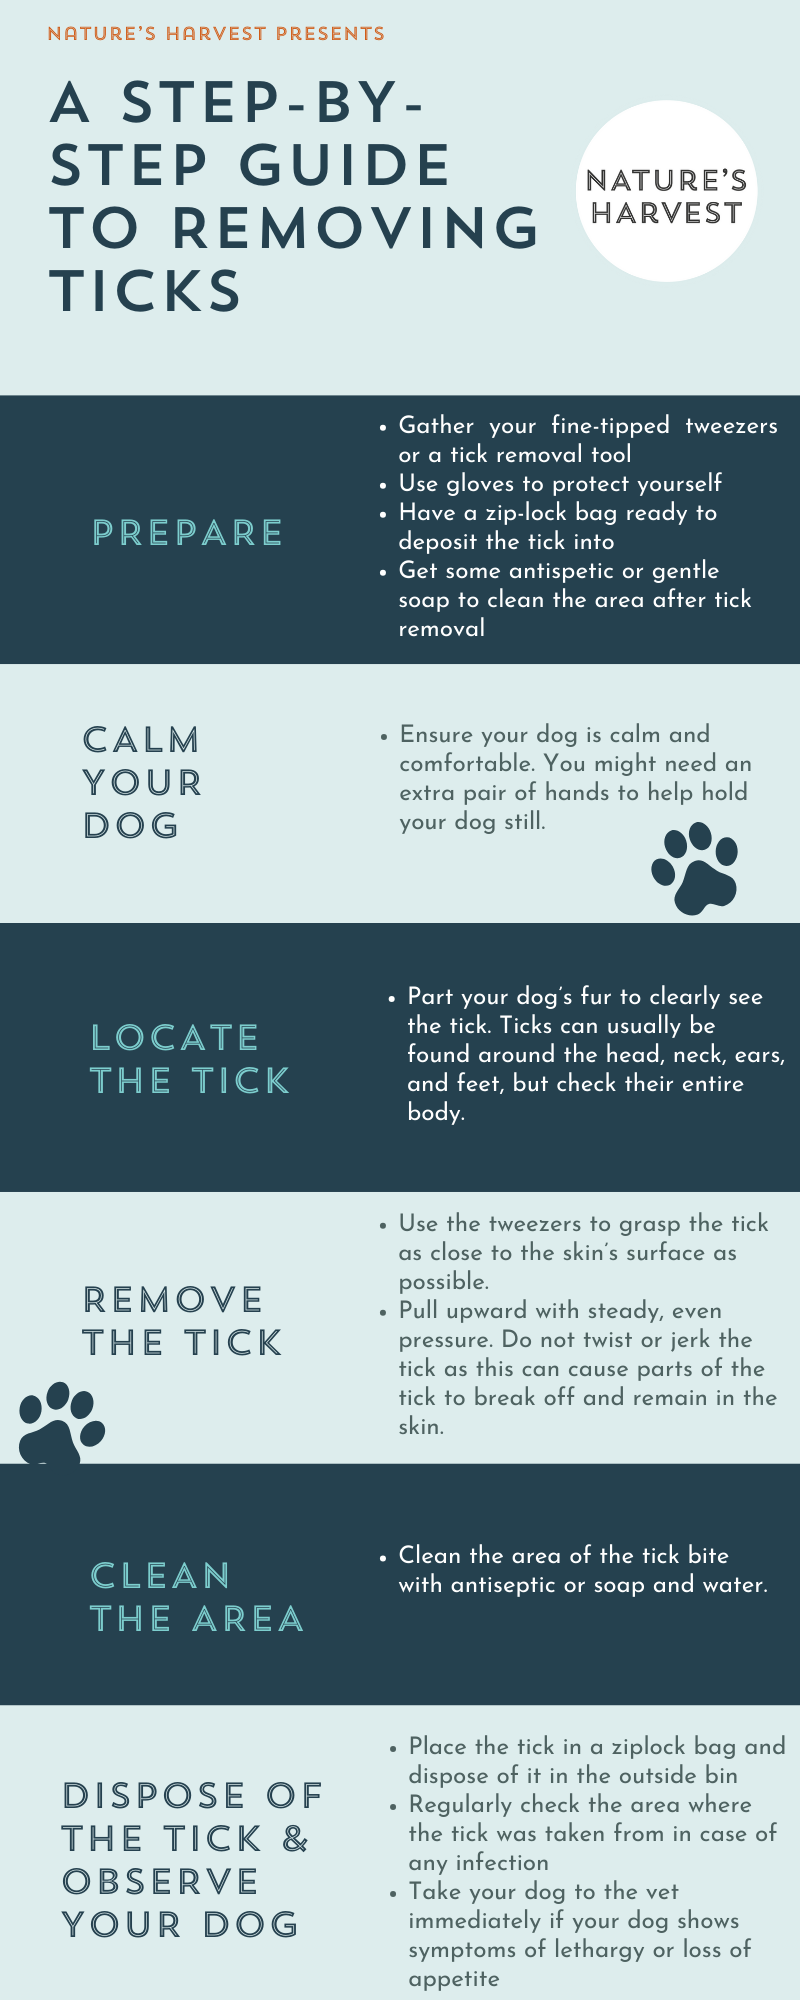 a Nature's Harvest Dog Food infographic showing the step-by-step guide to removing a dog tick safely